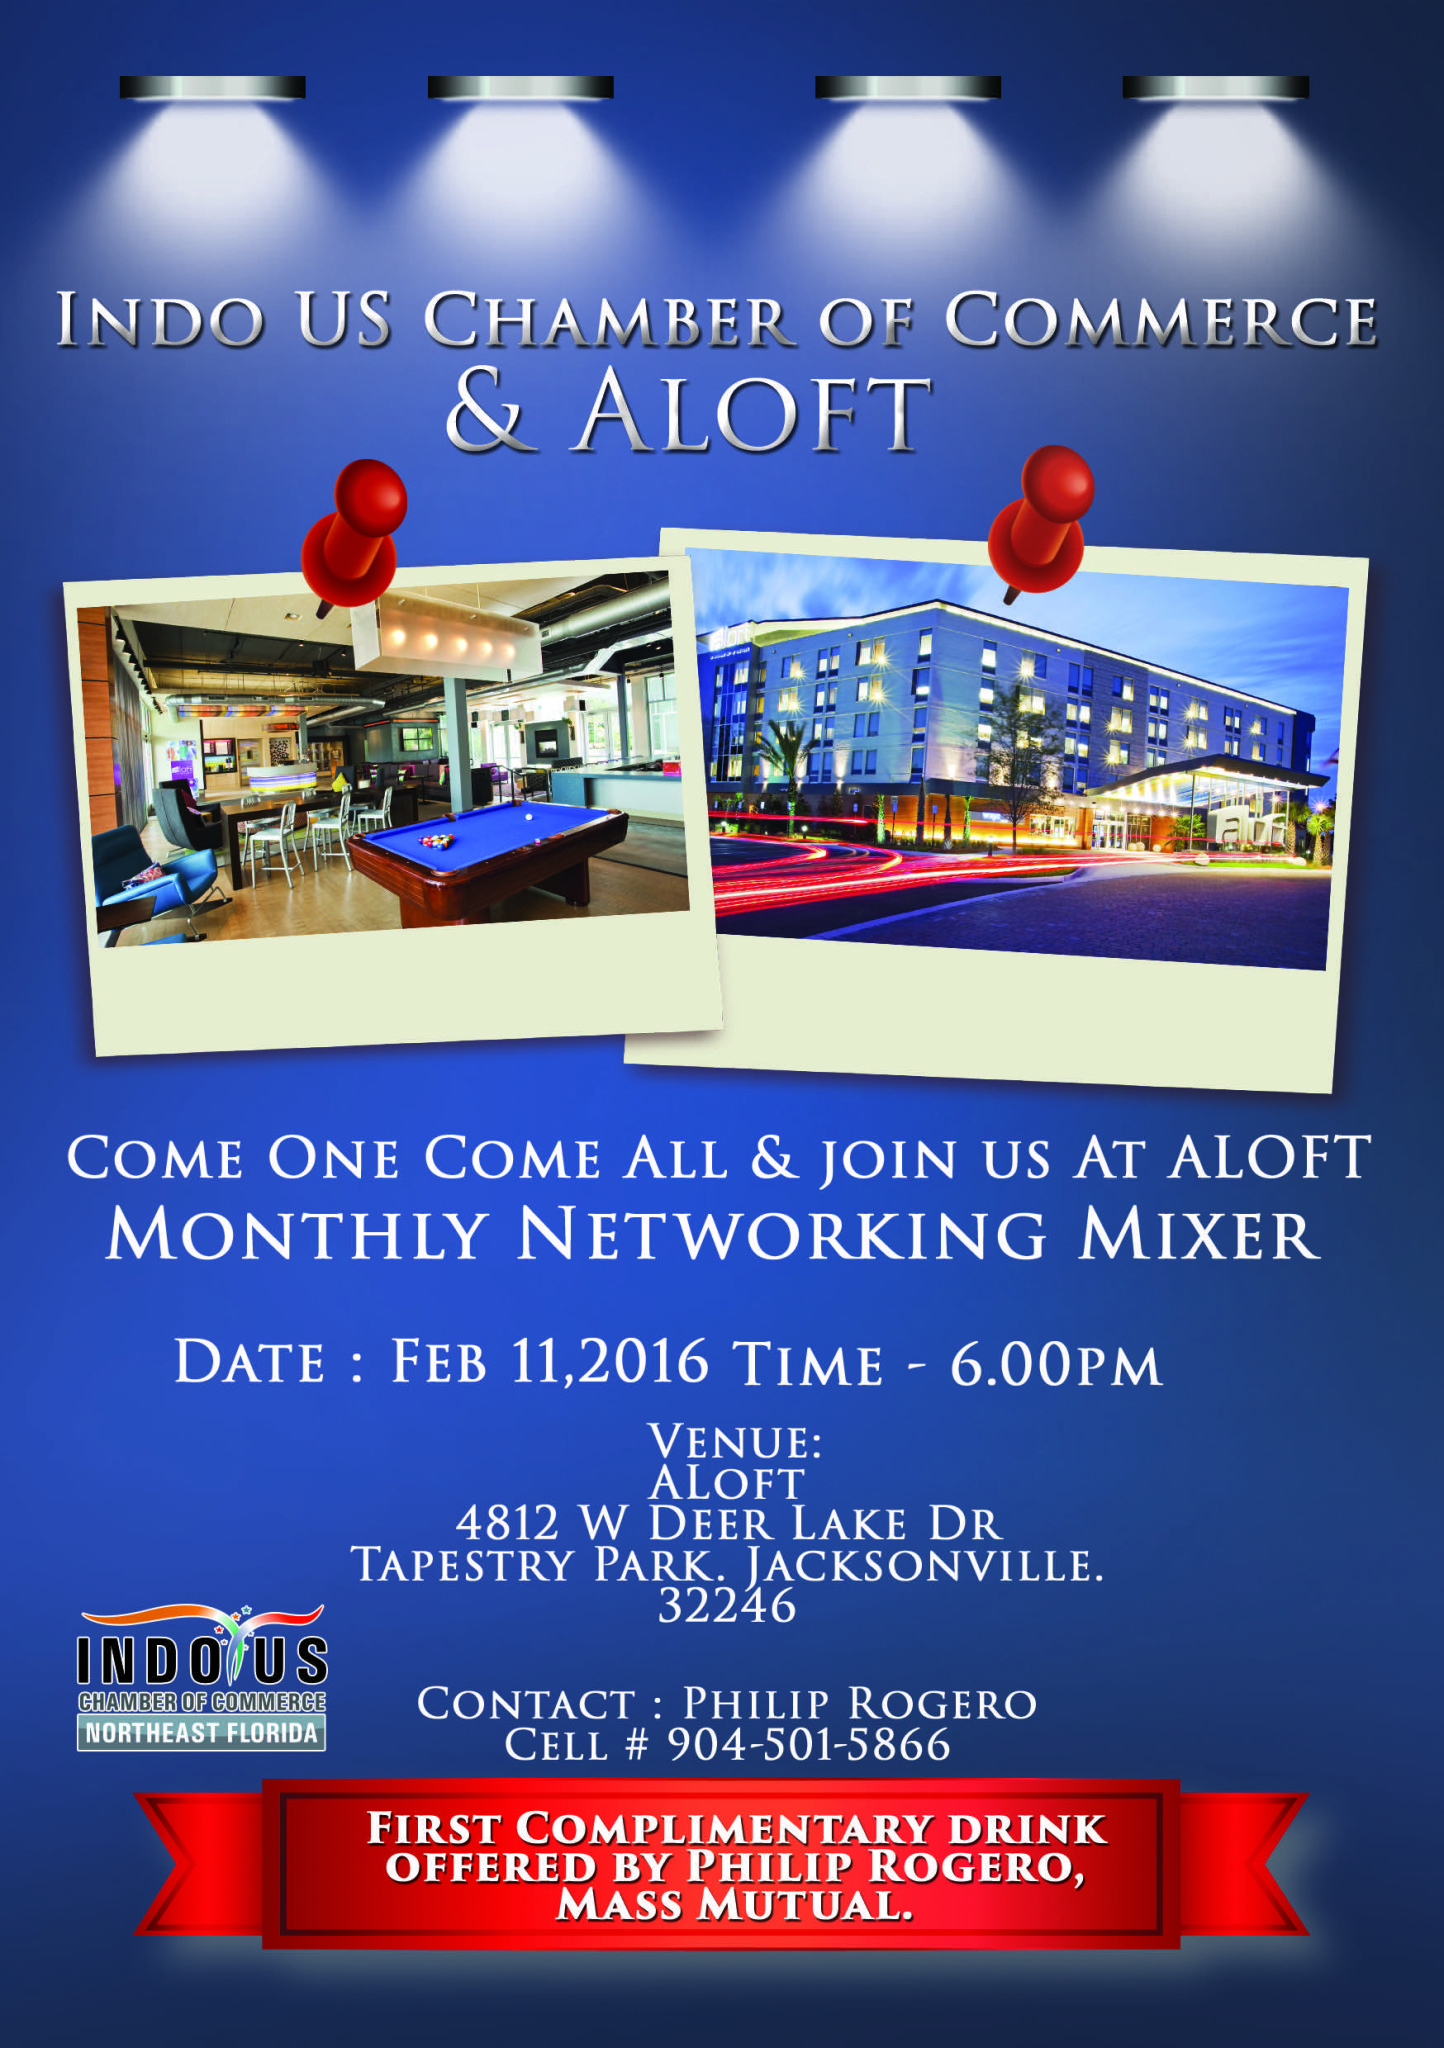 Indo-US Chamber of Commerce North East Florida Monthly Networking Mixer